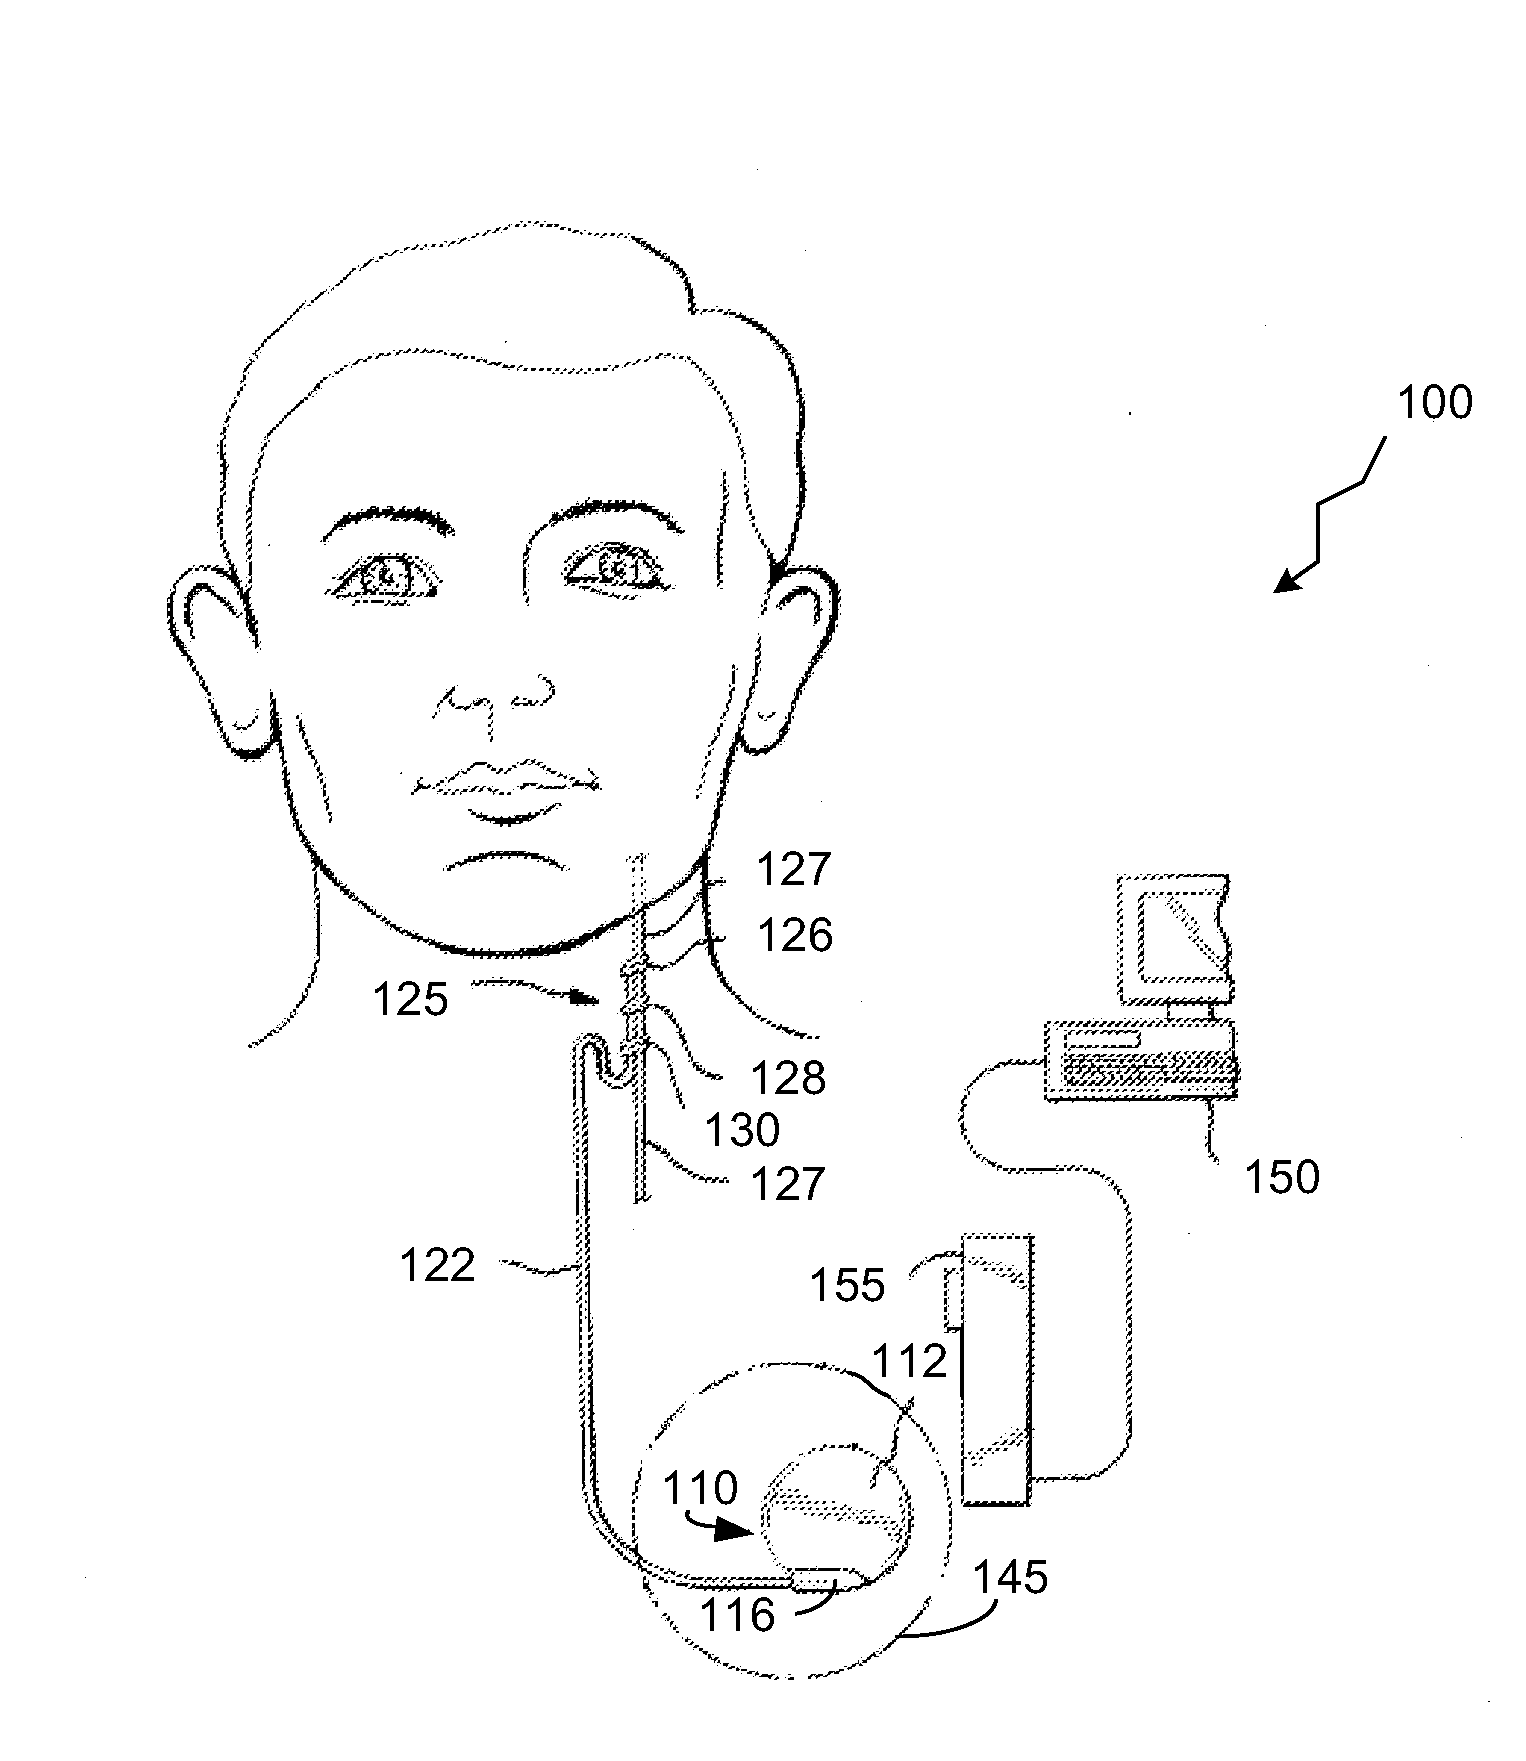 Dynamic lead condition detection for an implantable medical device